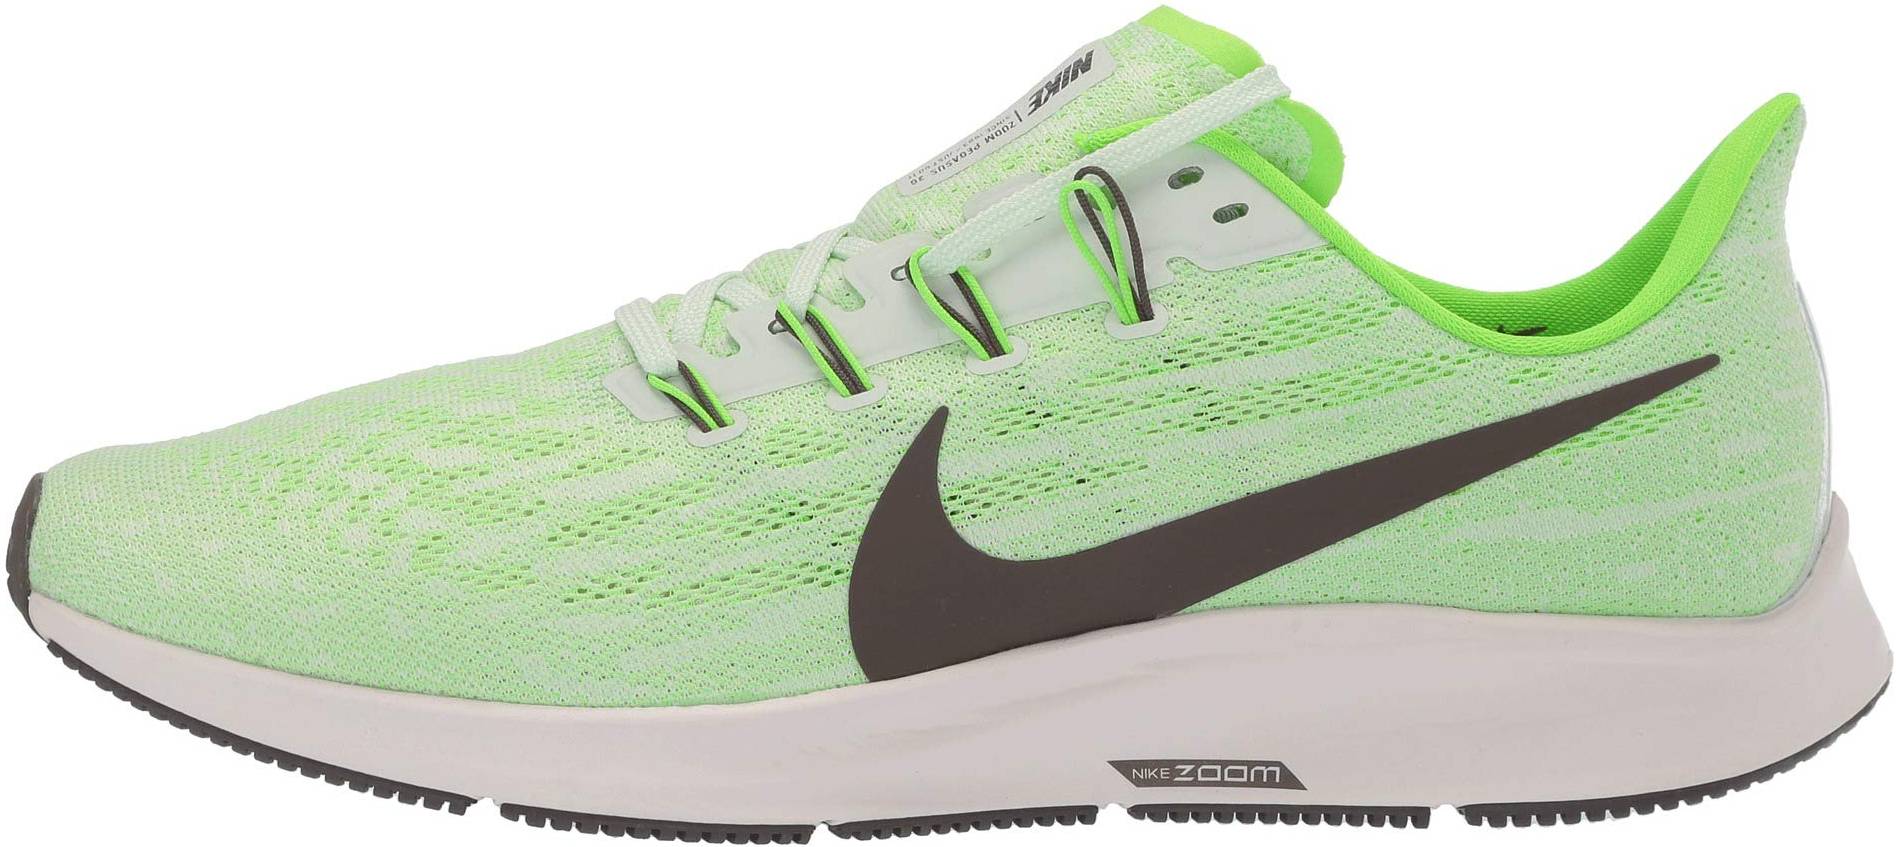 Antorchas clase Caducado 30+ Green Nike running shoes: Save up to 49% | RunRepeat